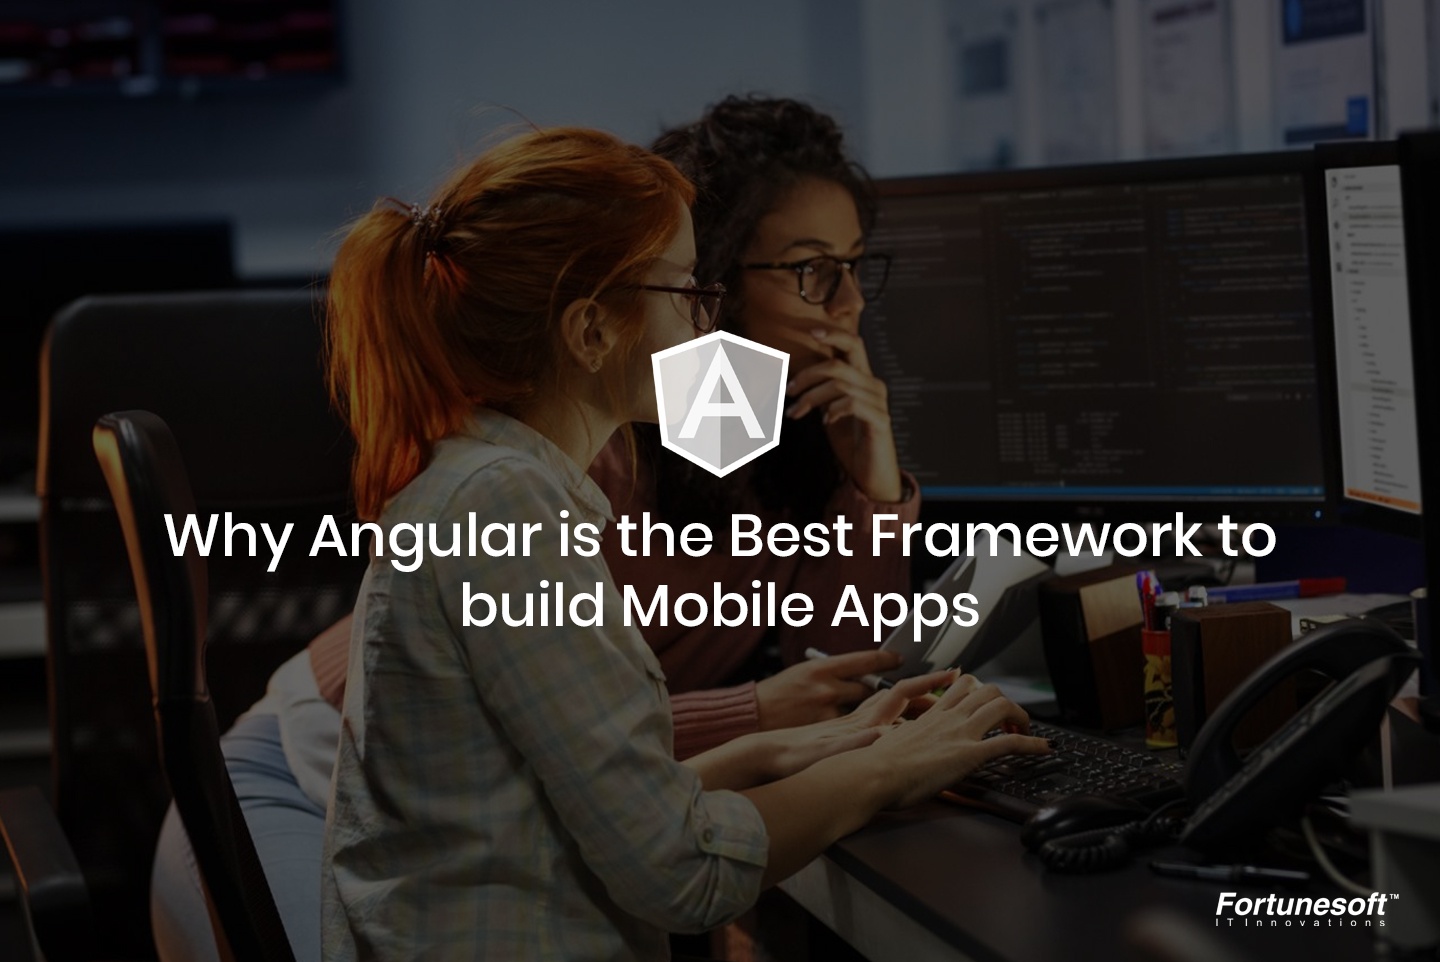 OpenCart News: Why build mobile apps with Angular